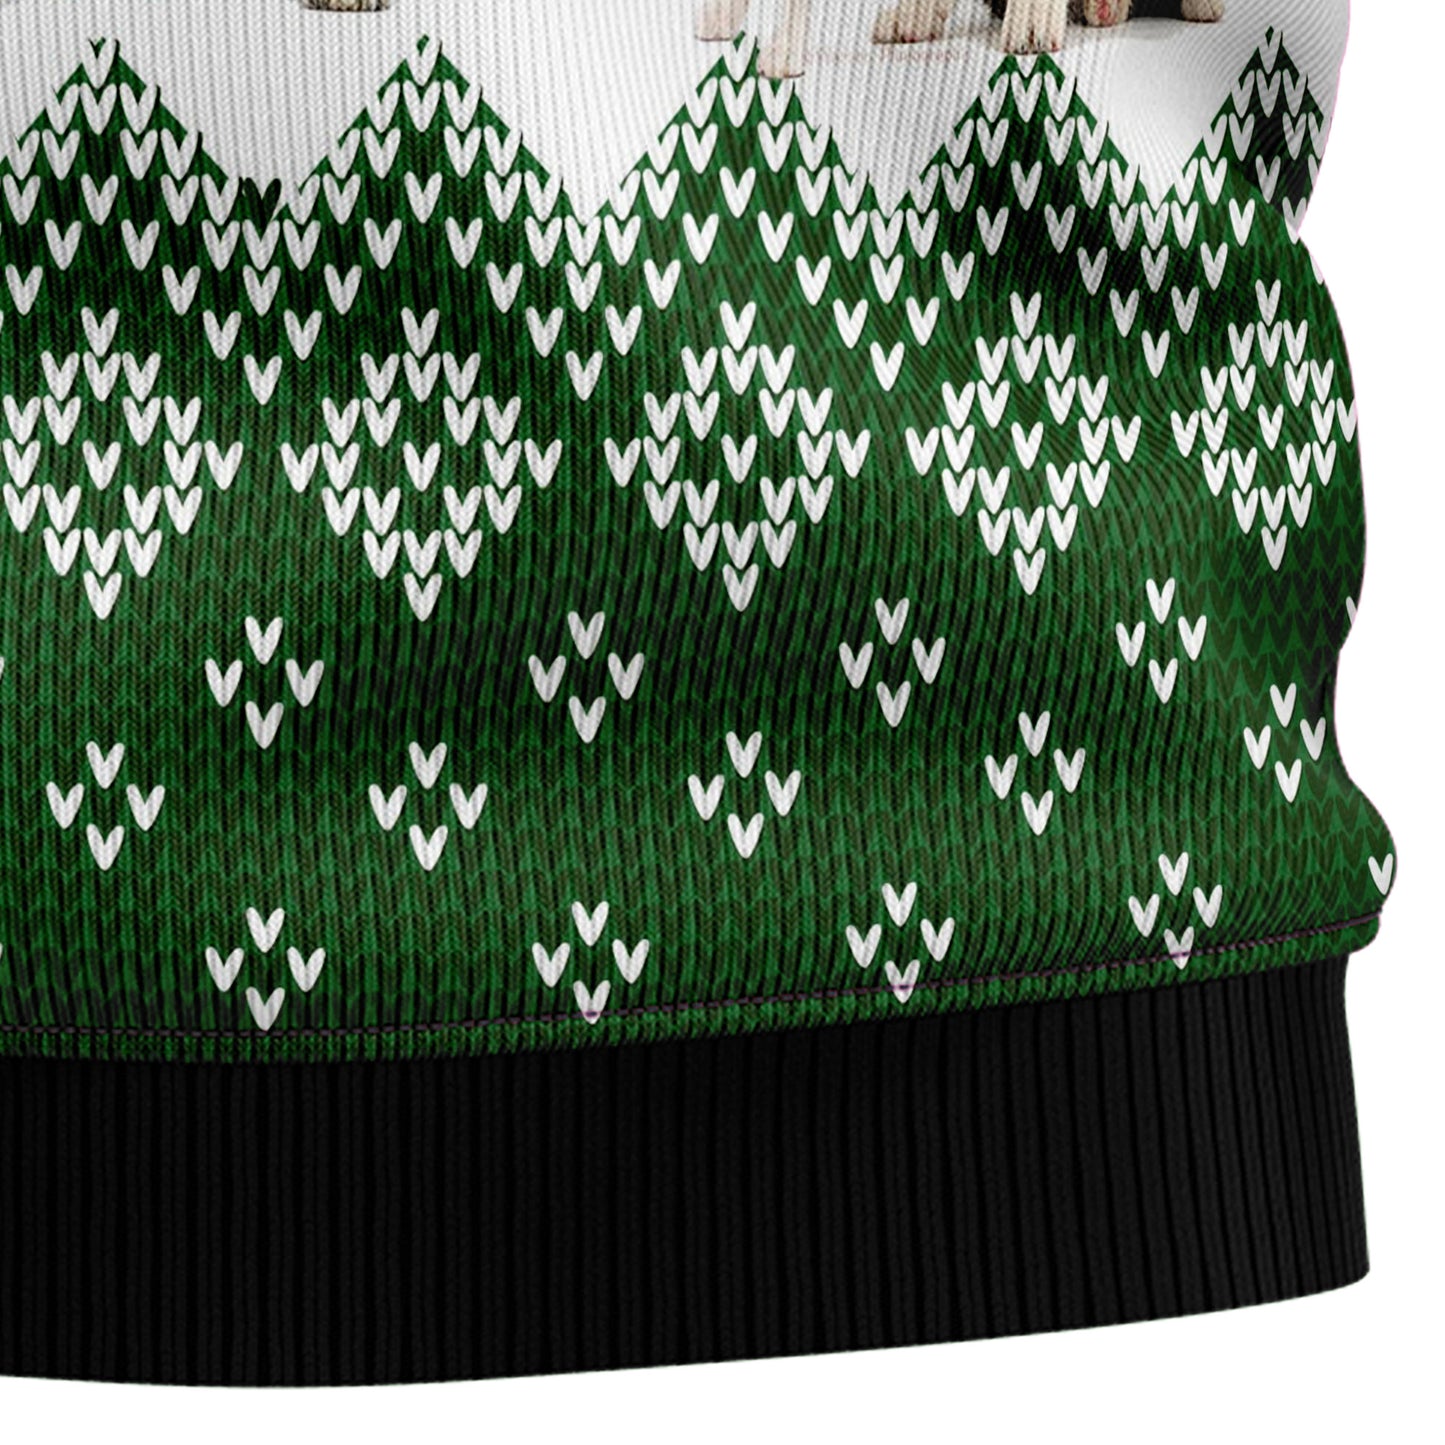 Border Collie Let It Snow D1211 Ugly Christmas Sweater